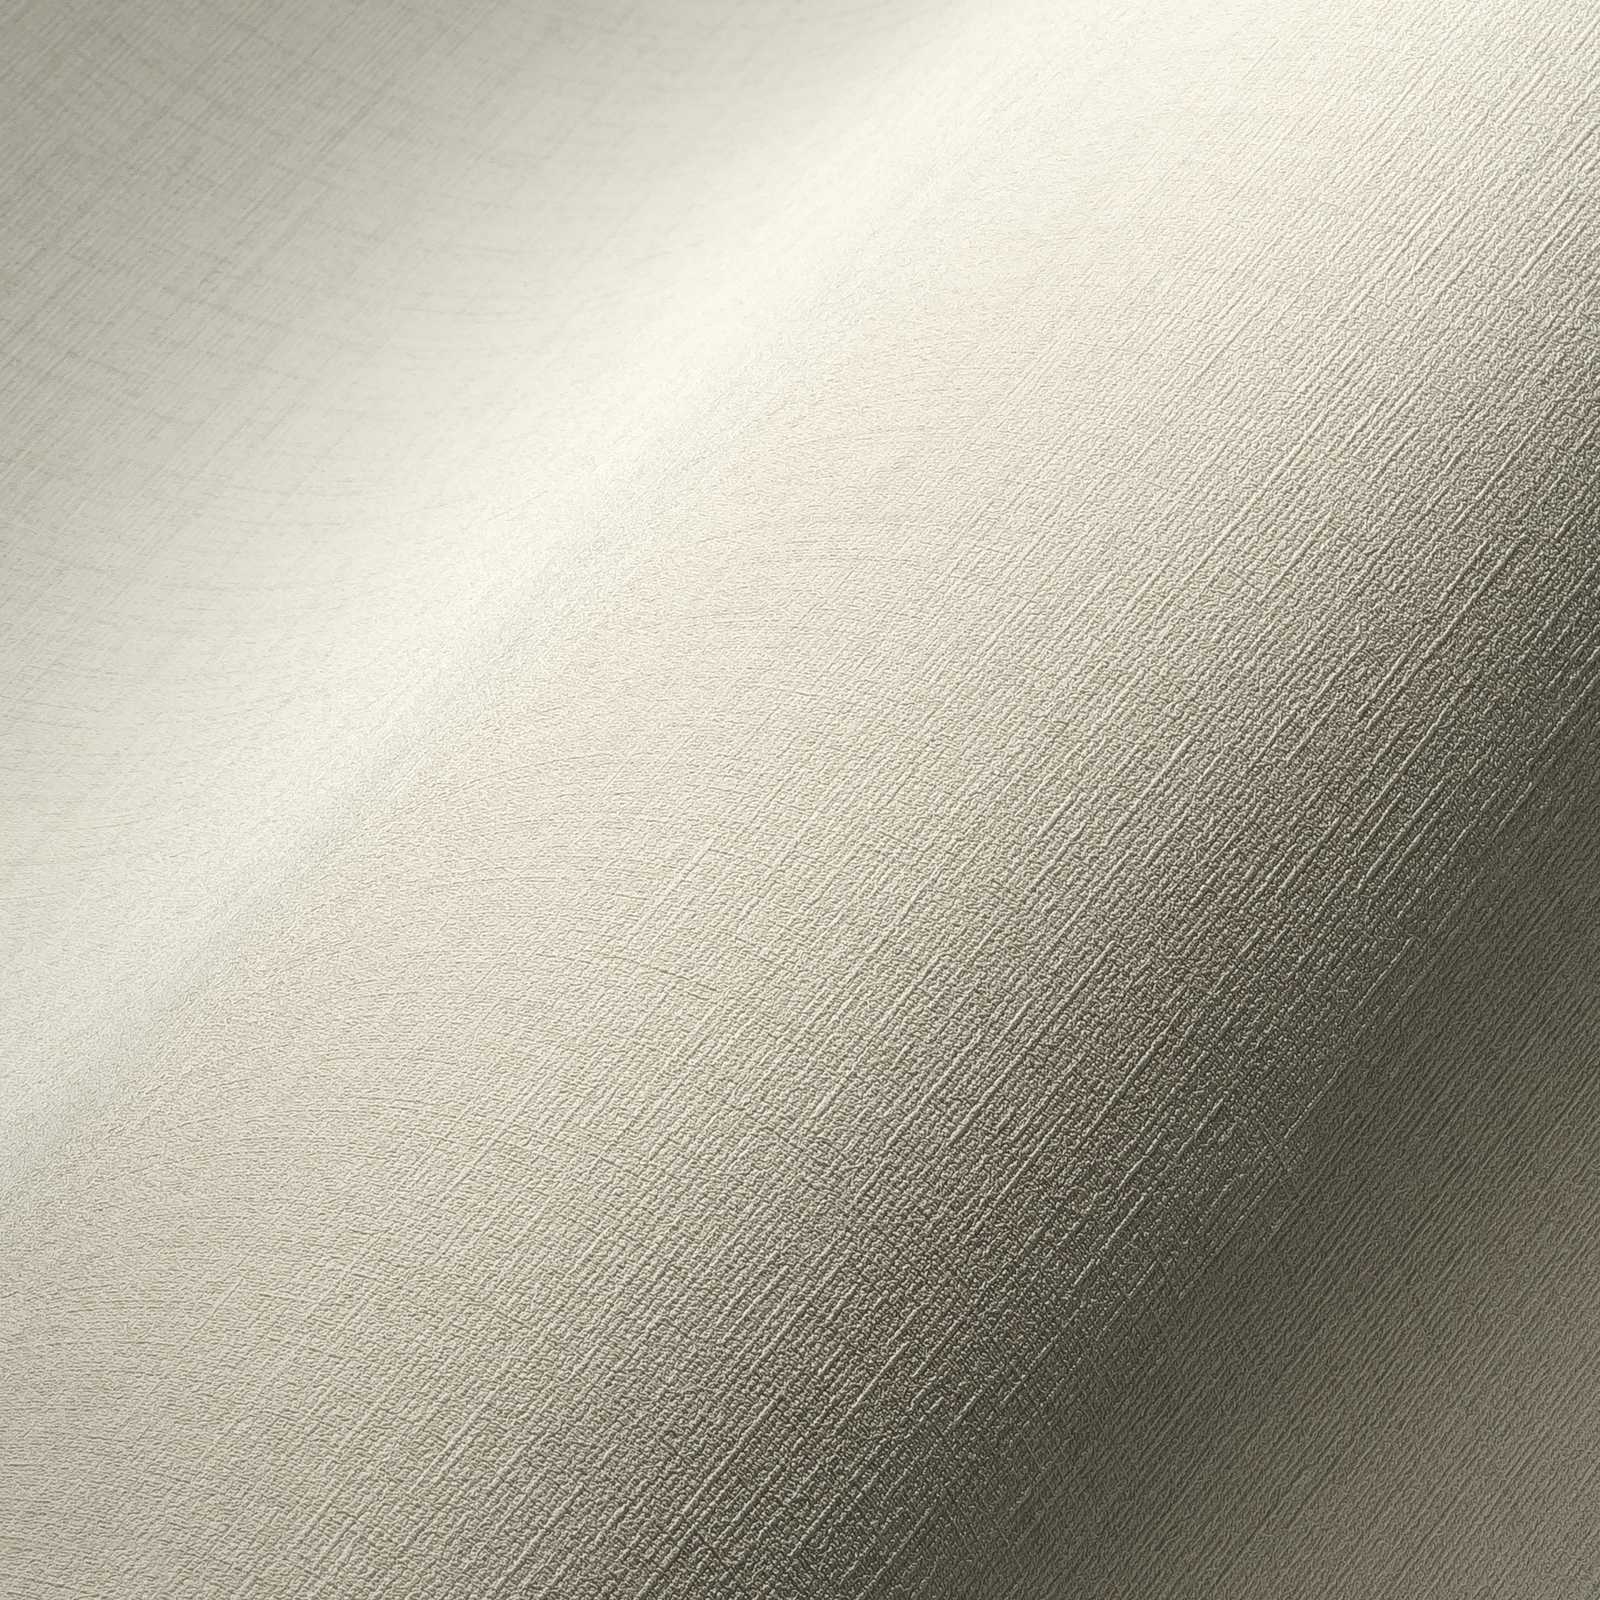             Cream white wallpaper with textile look & texture effect
        